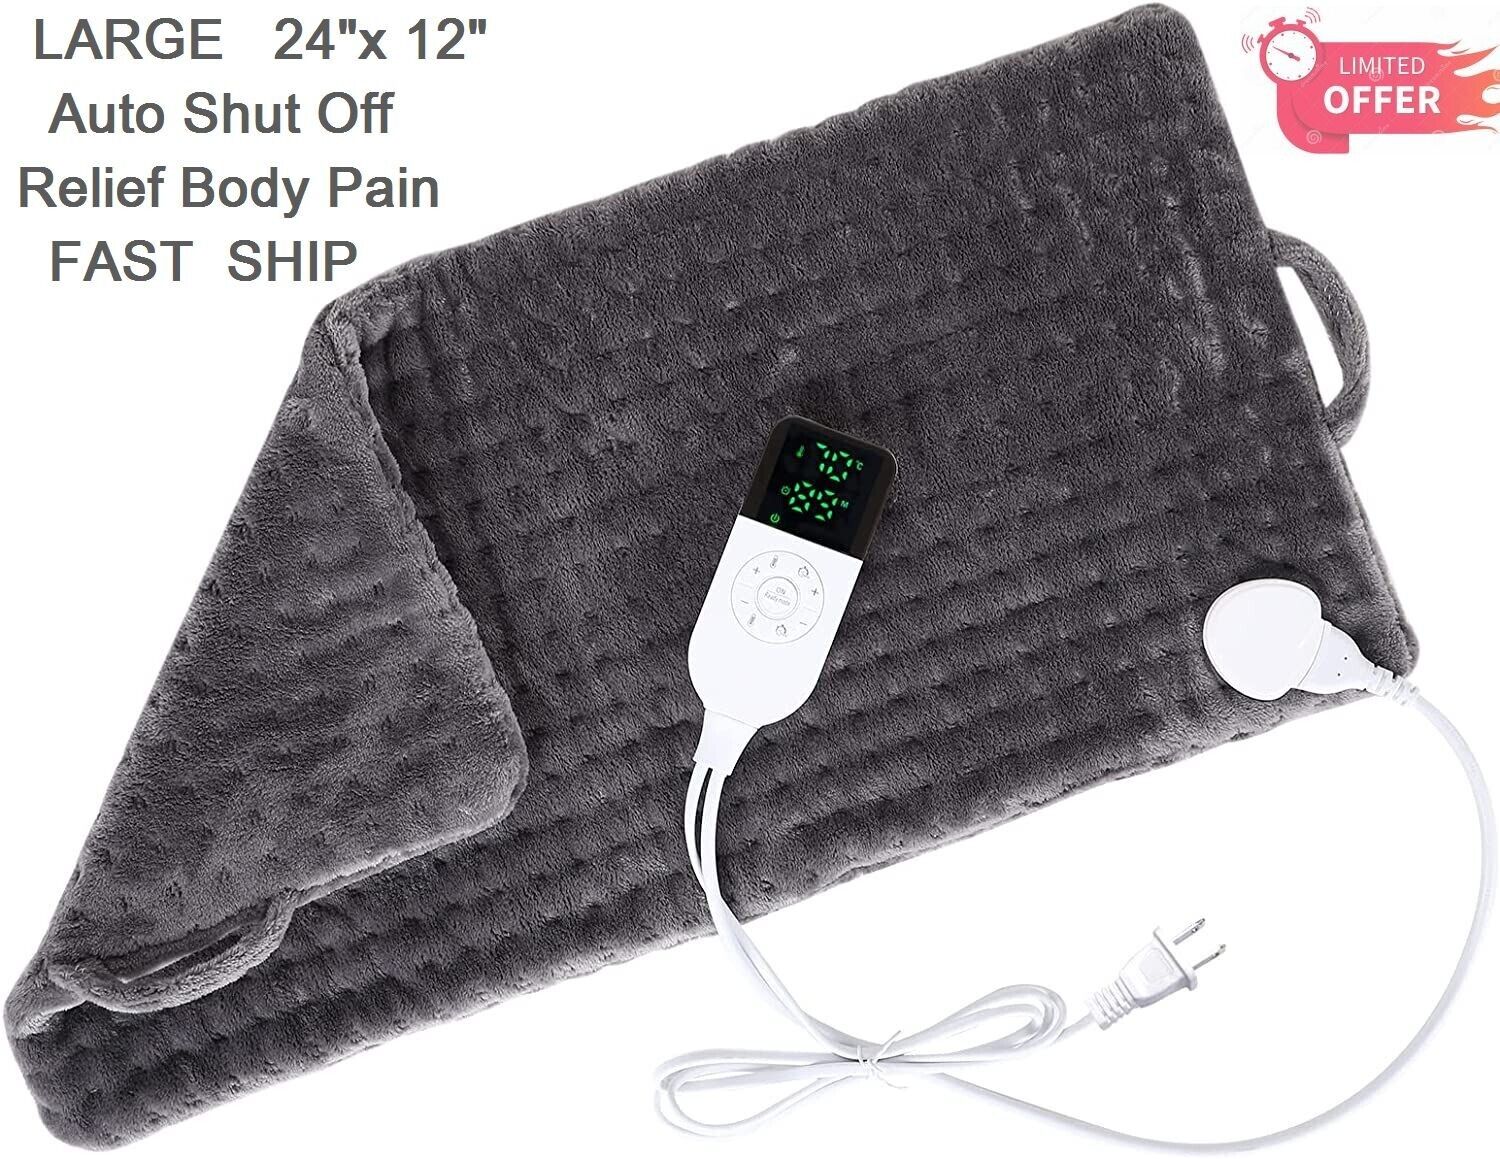 Weighted Electric Heating Pad Massaging Back Pain Cramps Relief 24" X 12"  Large